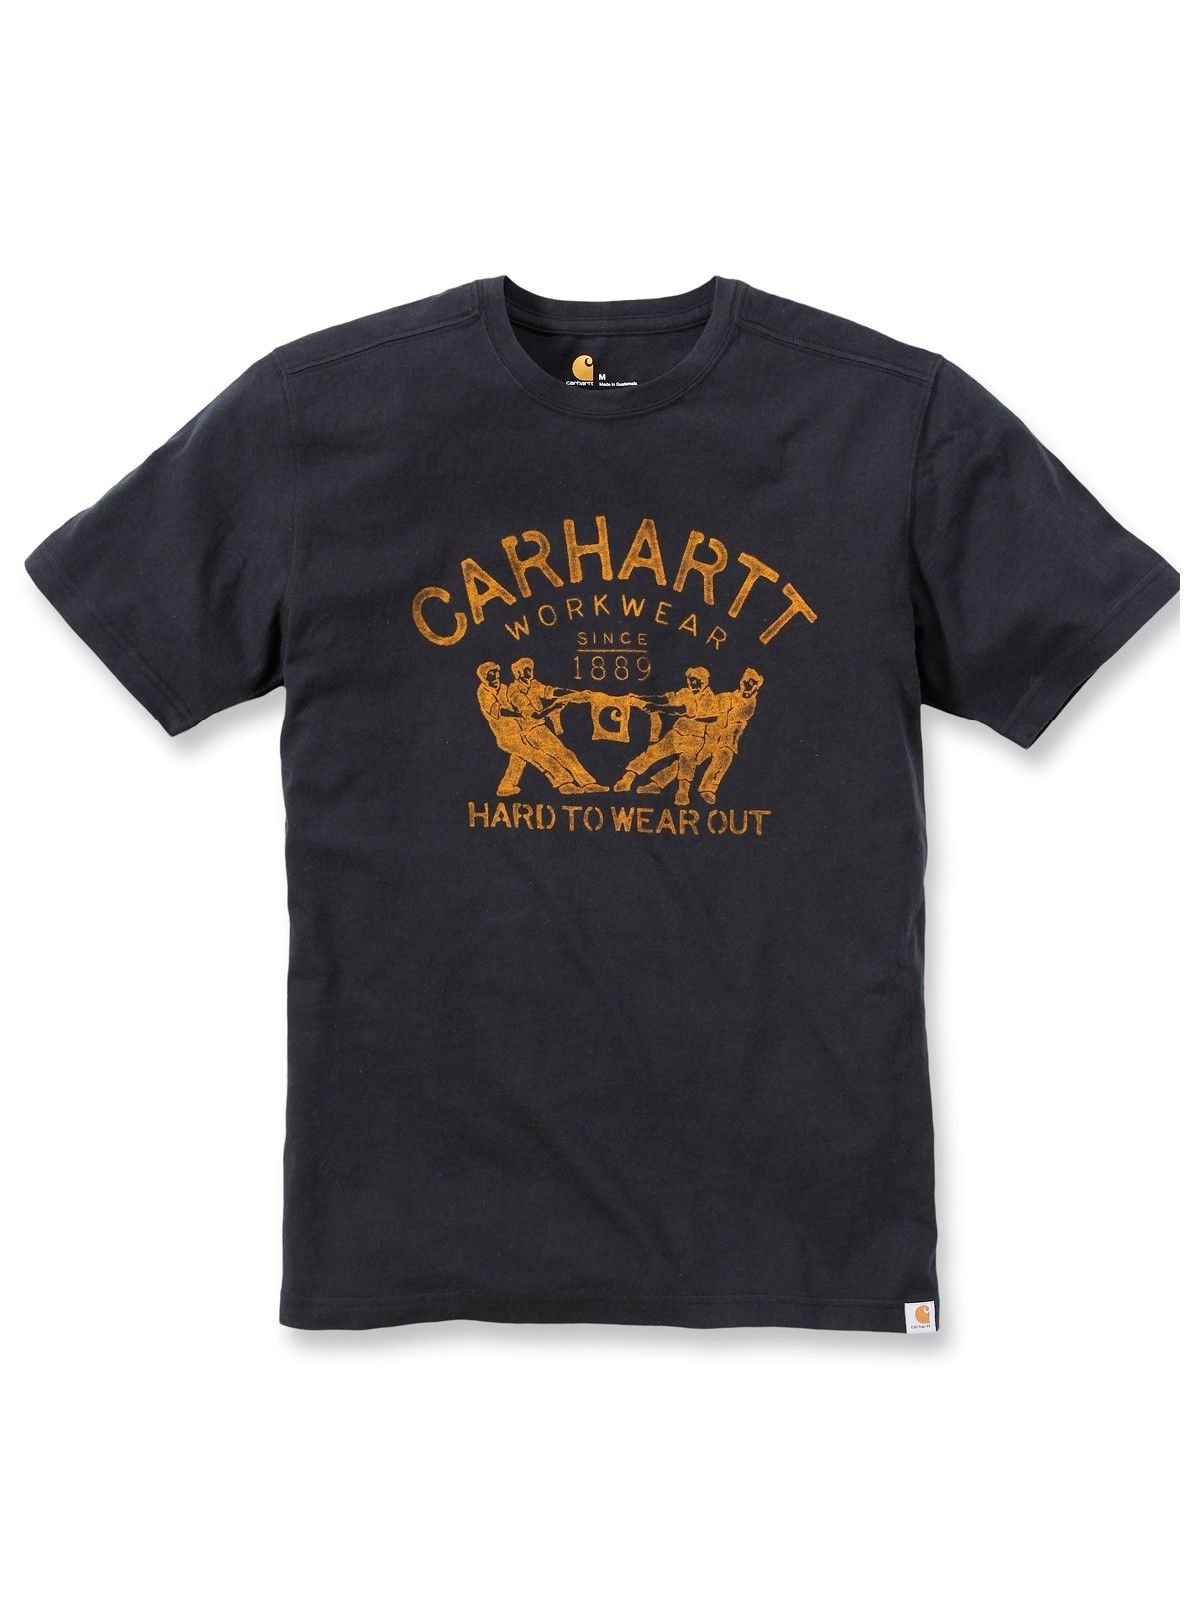 Carhartt hard to wear out graphic t-shirt s/s 102097 